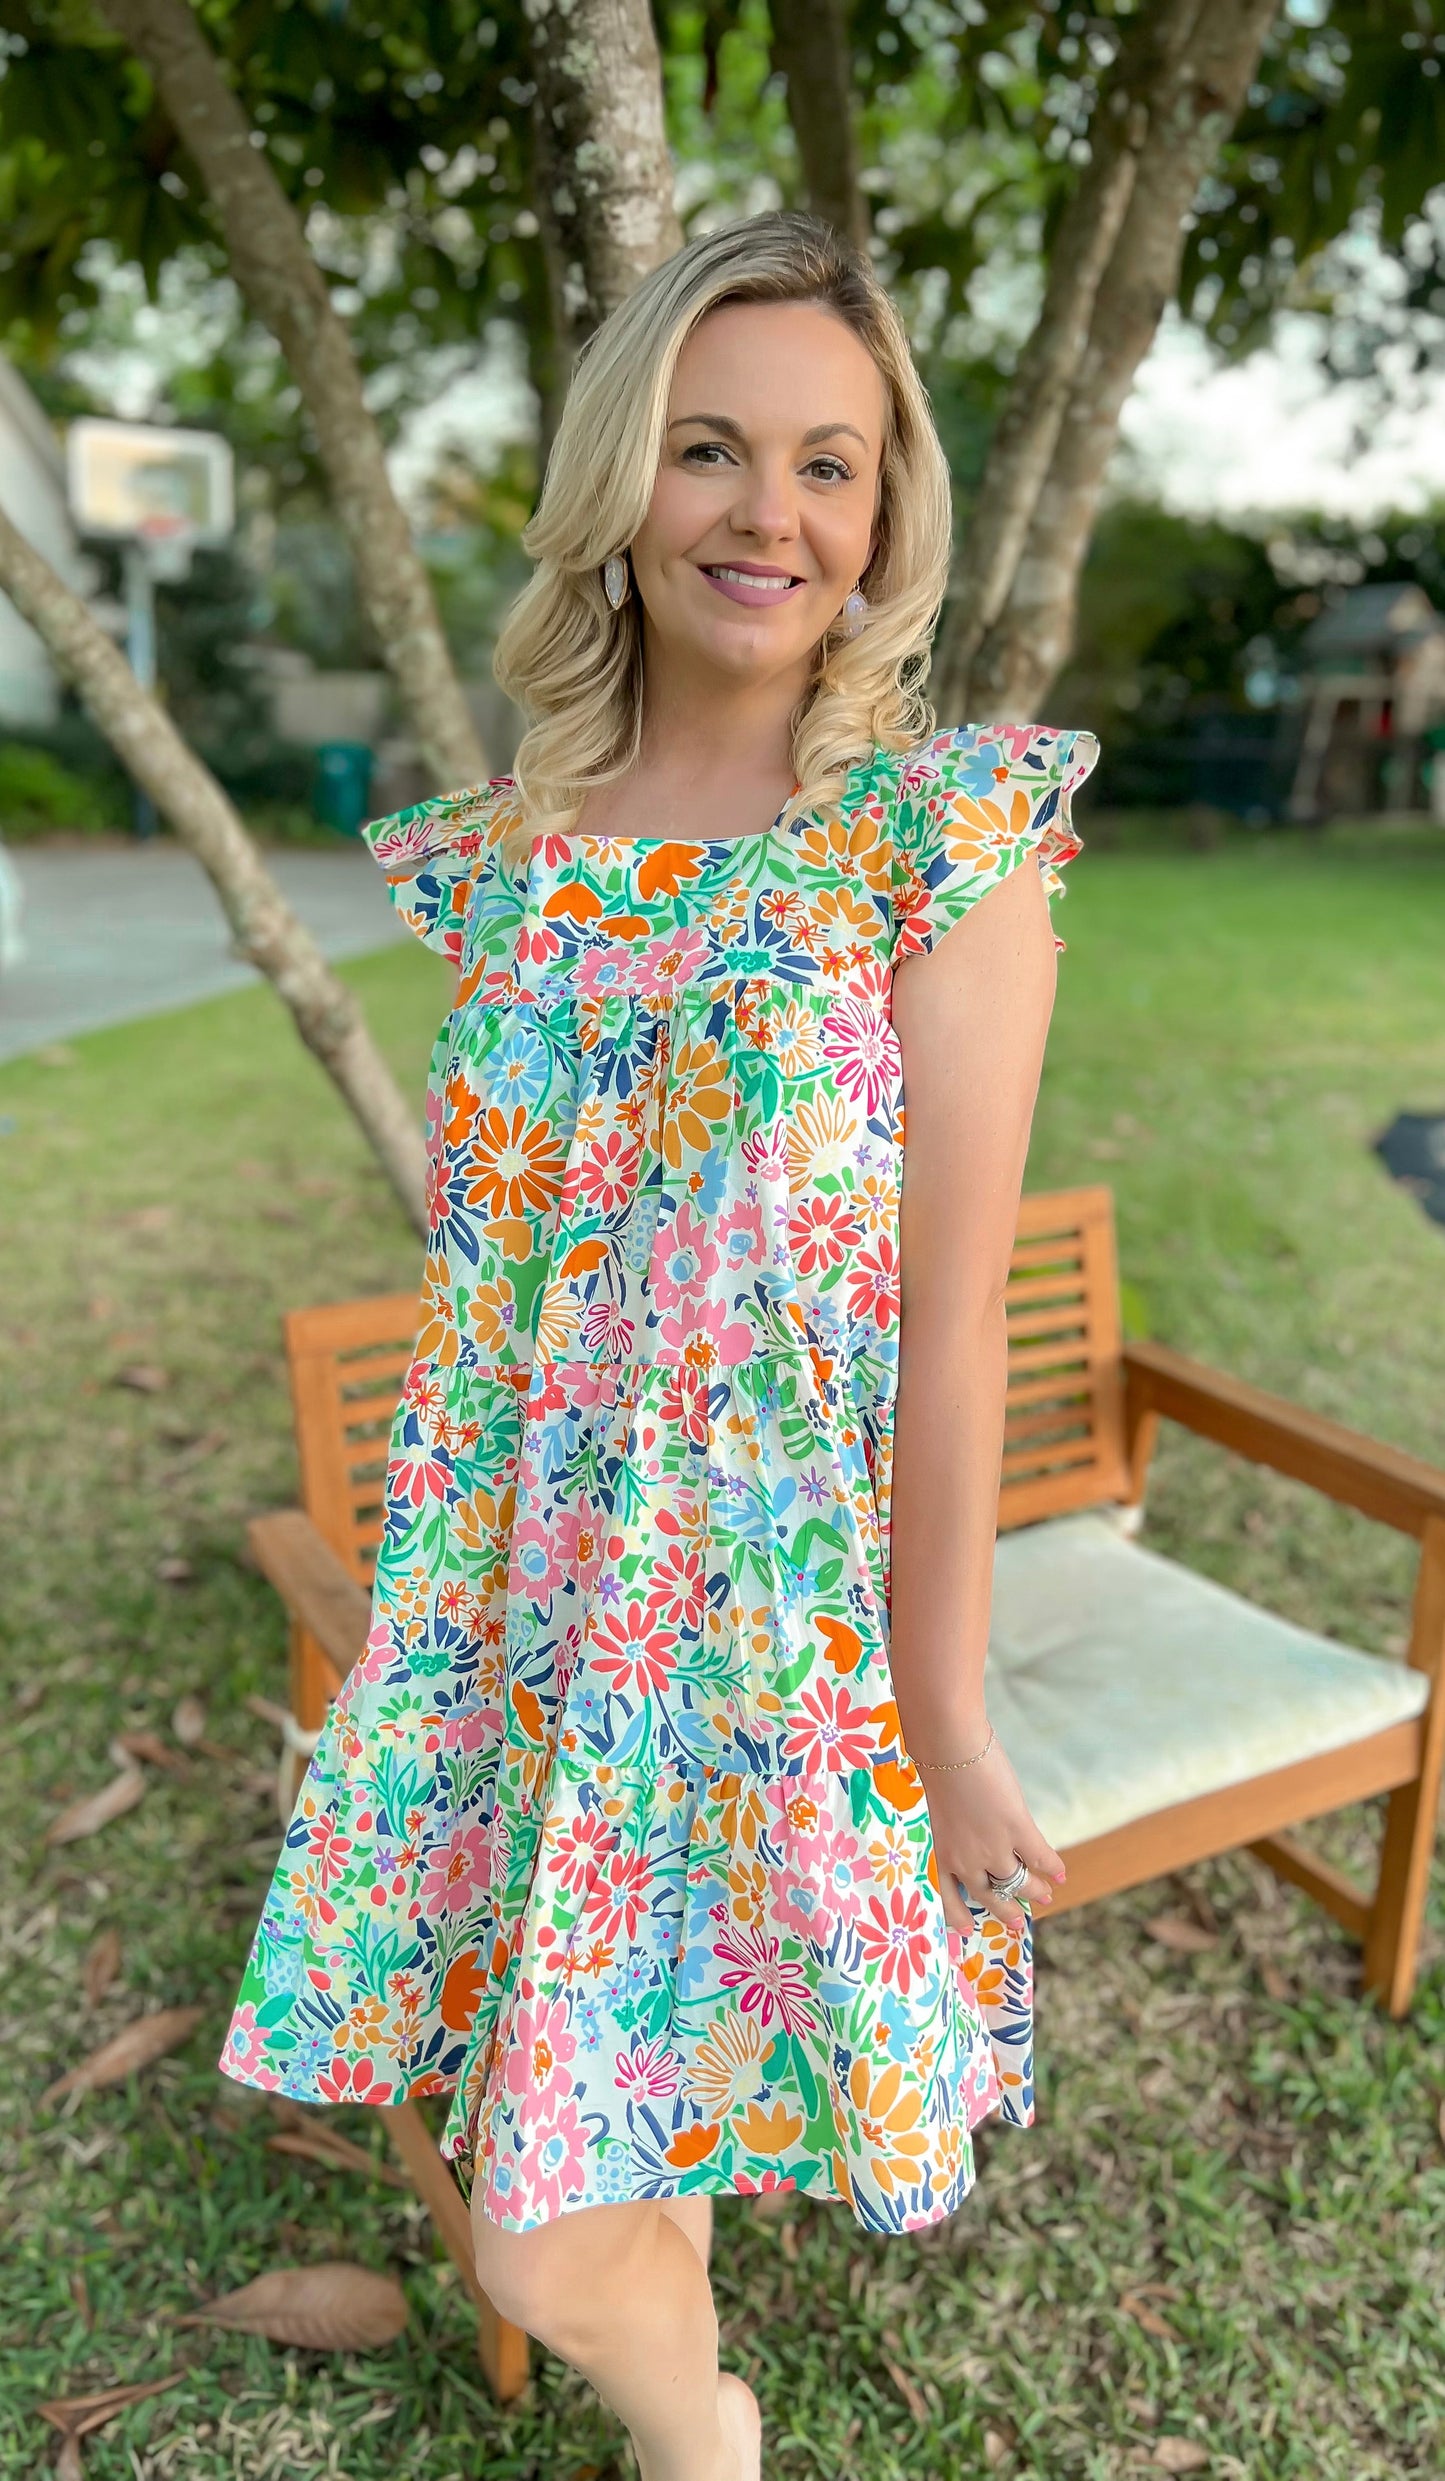 All Eyes on Me Floral Dress